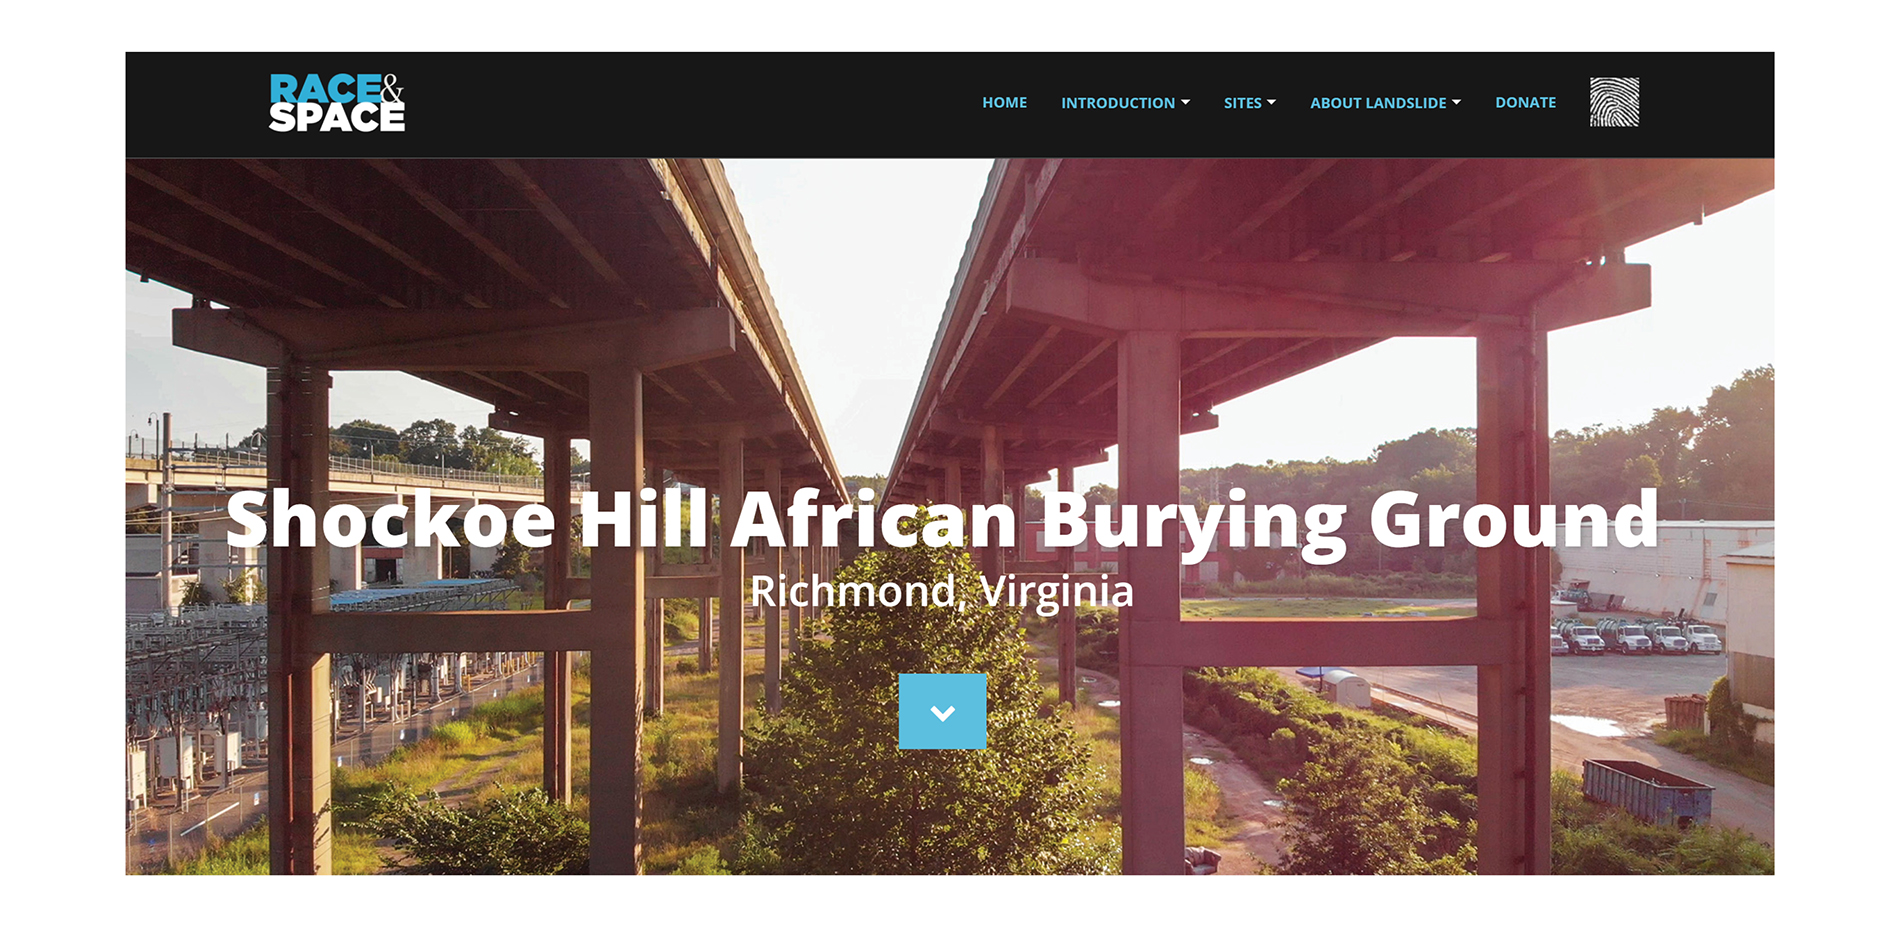 “Landslide: Race and Space – Page 9 – Shockoe Hill African Burying Ground landing page”